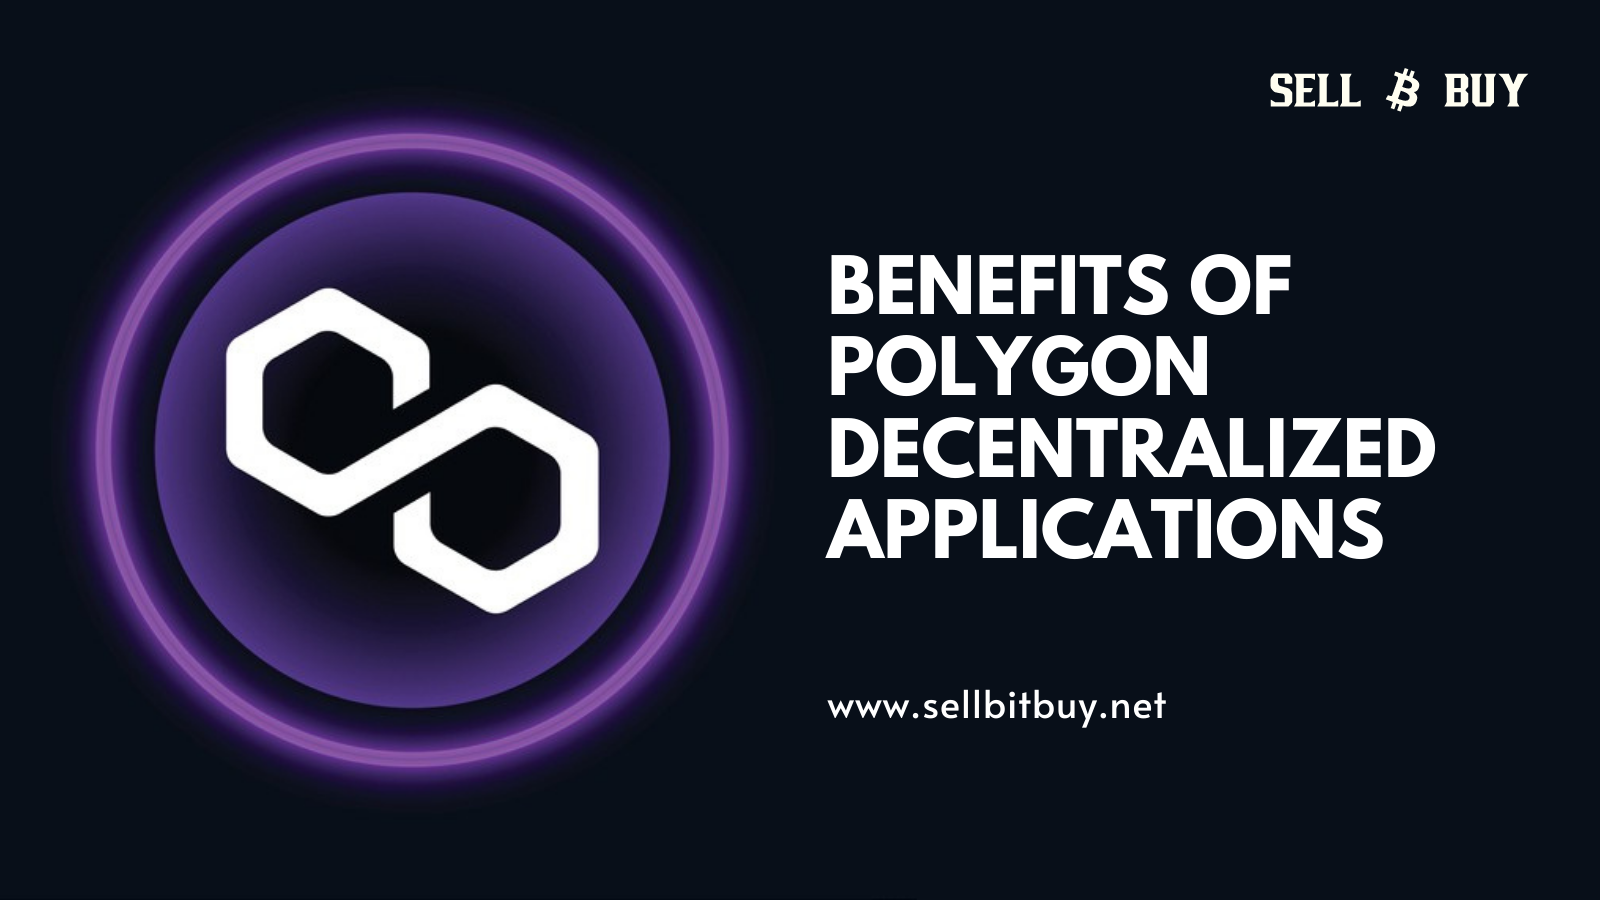 Article about Benefits Of Polygon Decentralized Applications